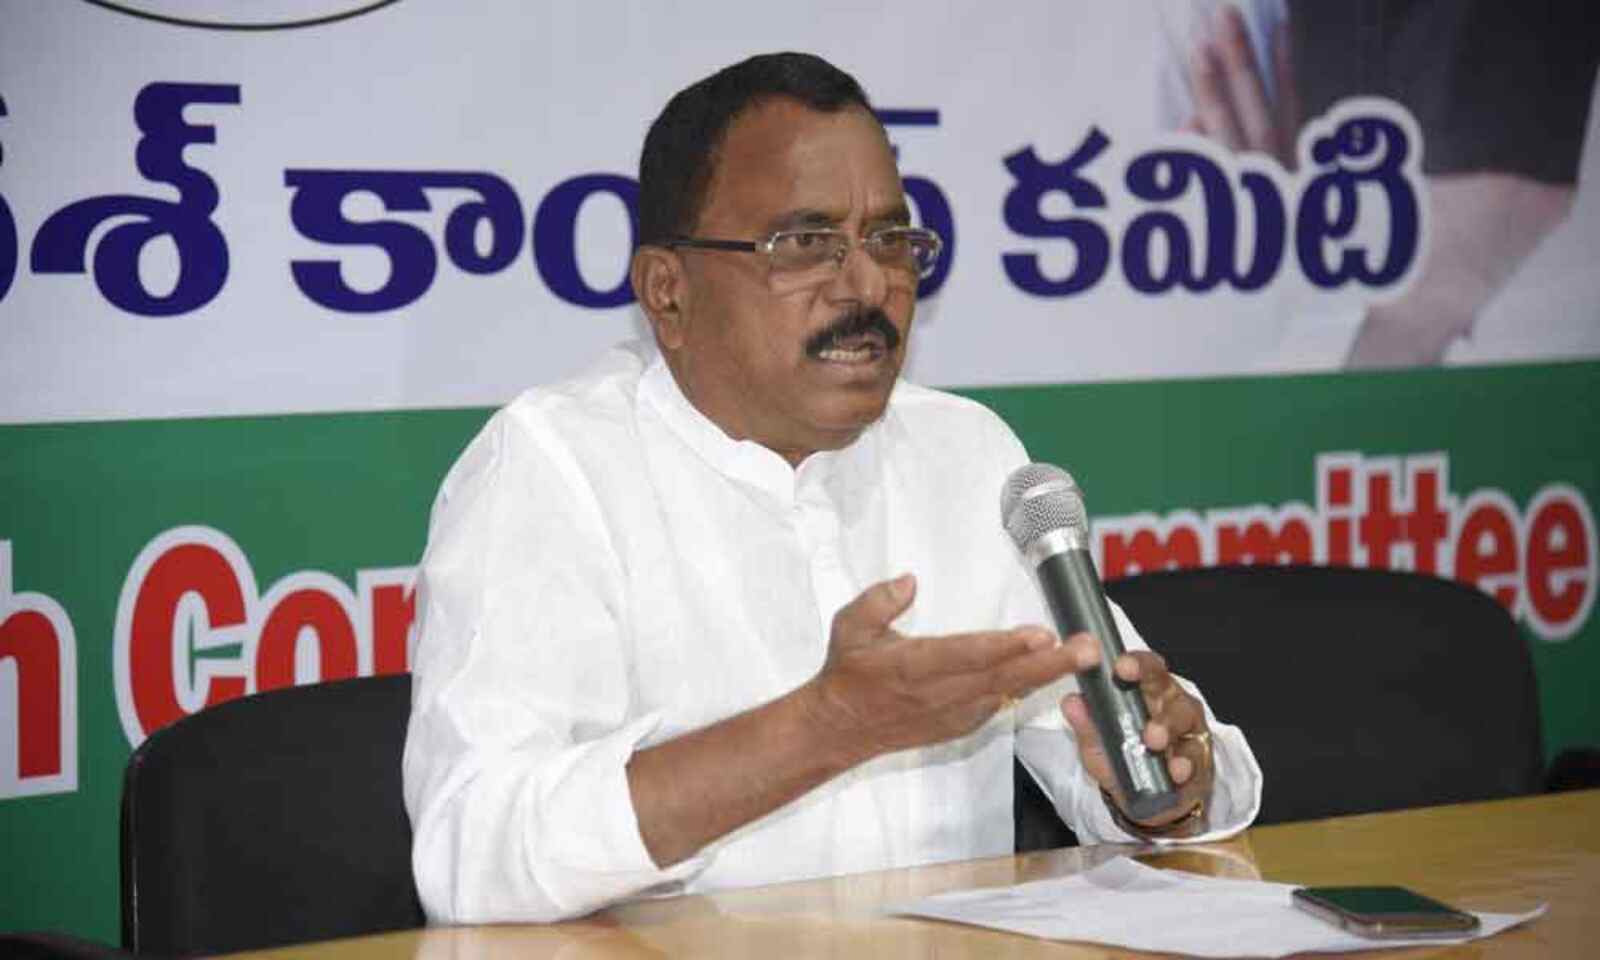 Disgusted people keen on ousting KCR in ensuing elections: Mallu Ravi